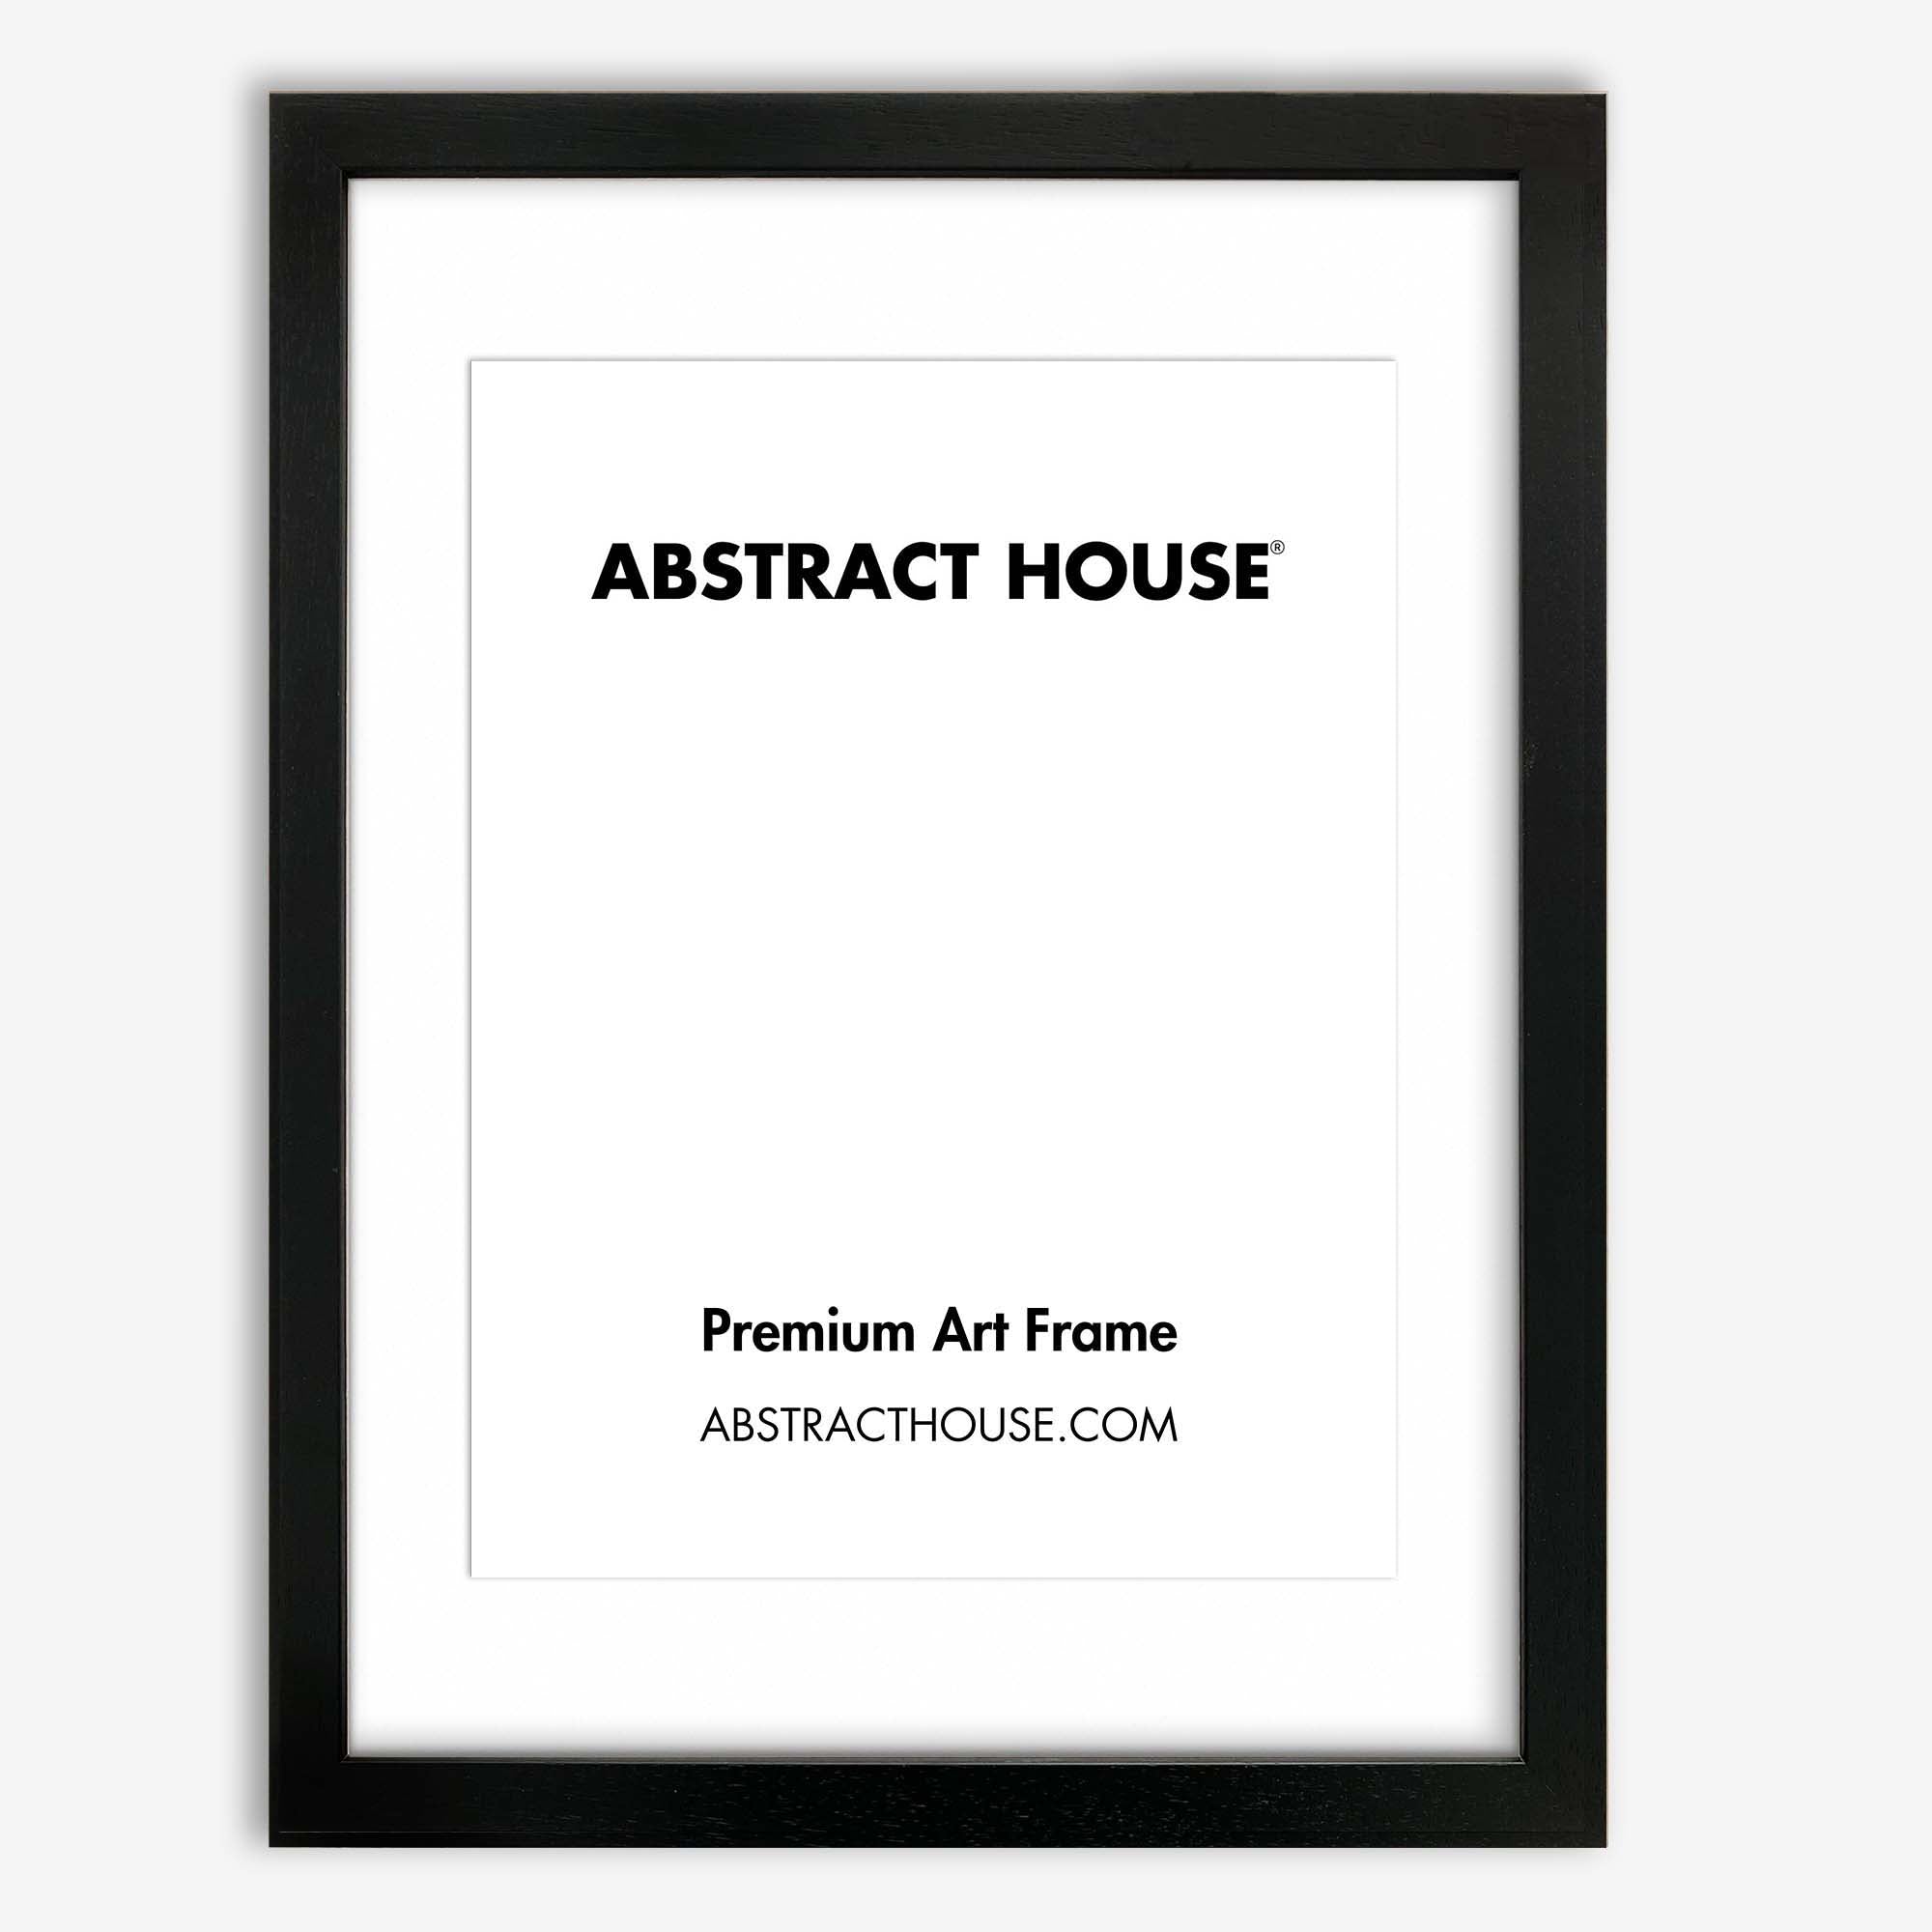 21x30cm Wooden Picture Frame-Black-A5 15 x 21 cm-Abstract House